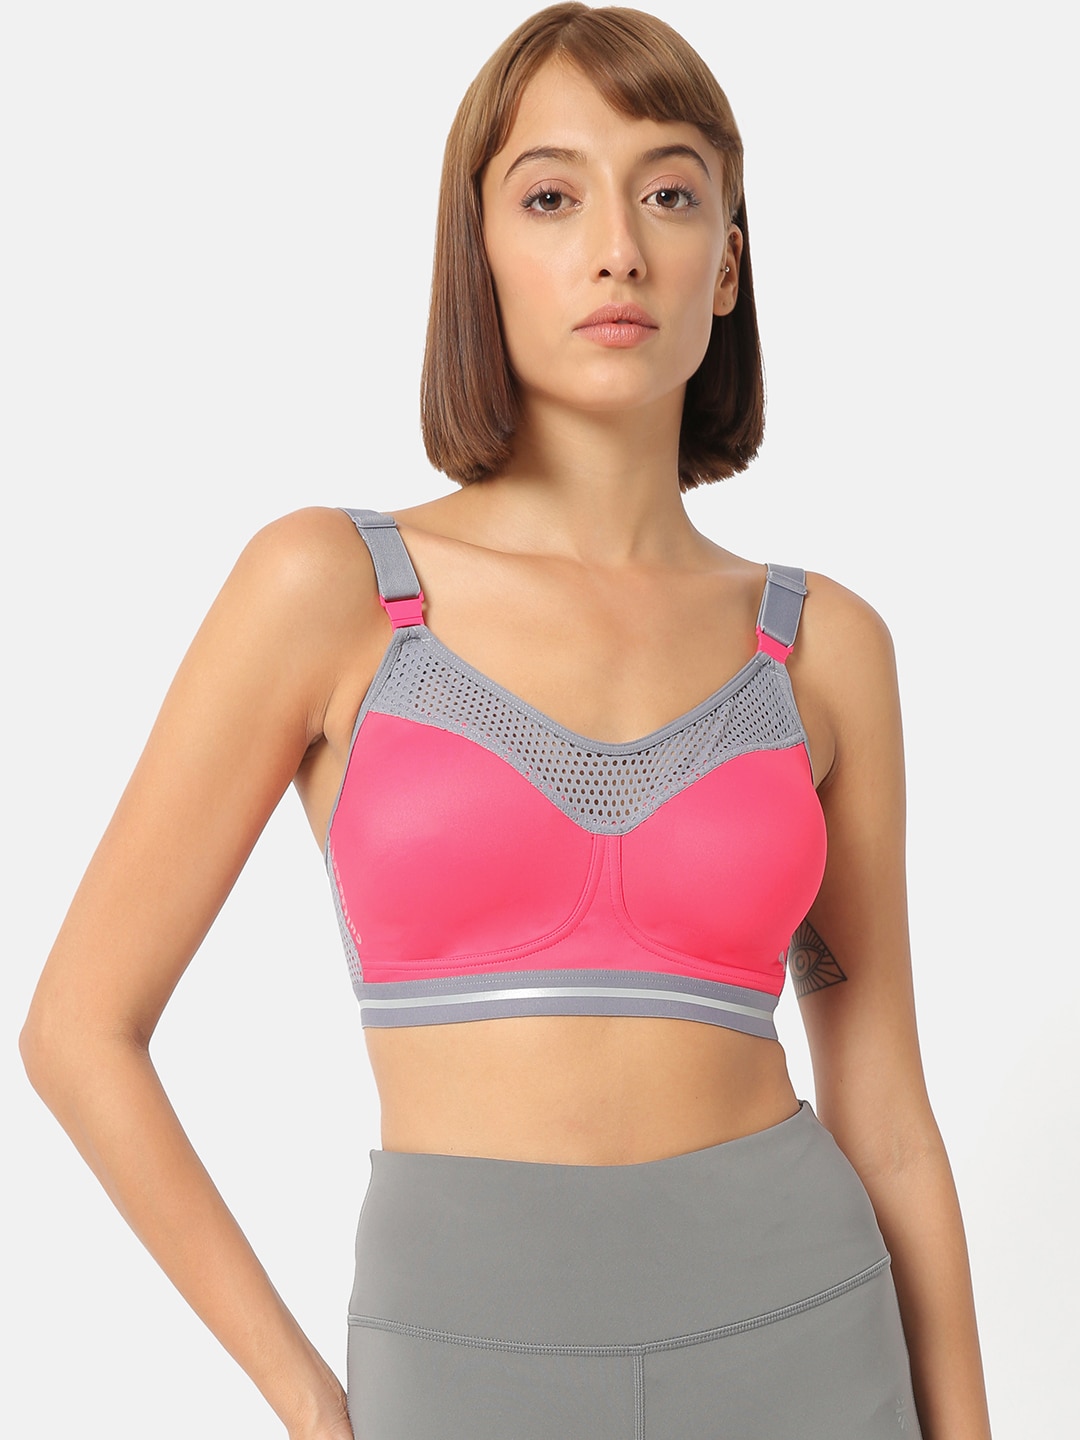 Cultsport Pink & Grey Solid Non-Wired Lightly Padded Sports Bra AW19WS1233D Price in India